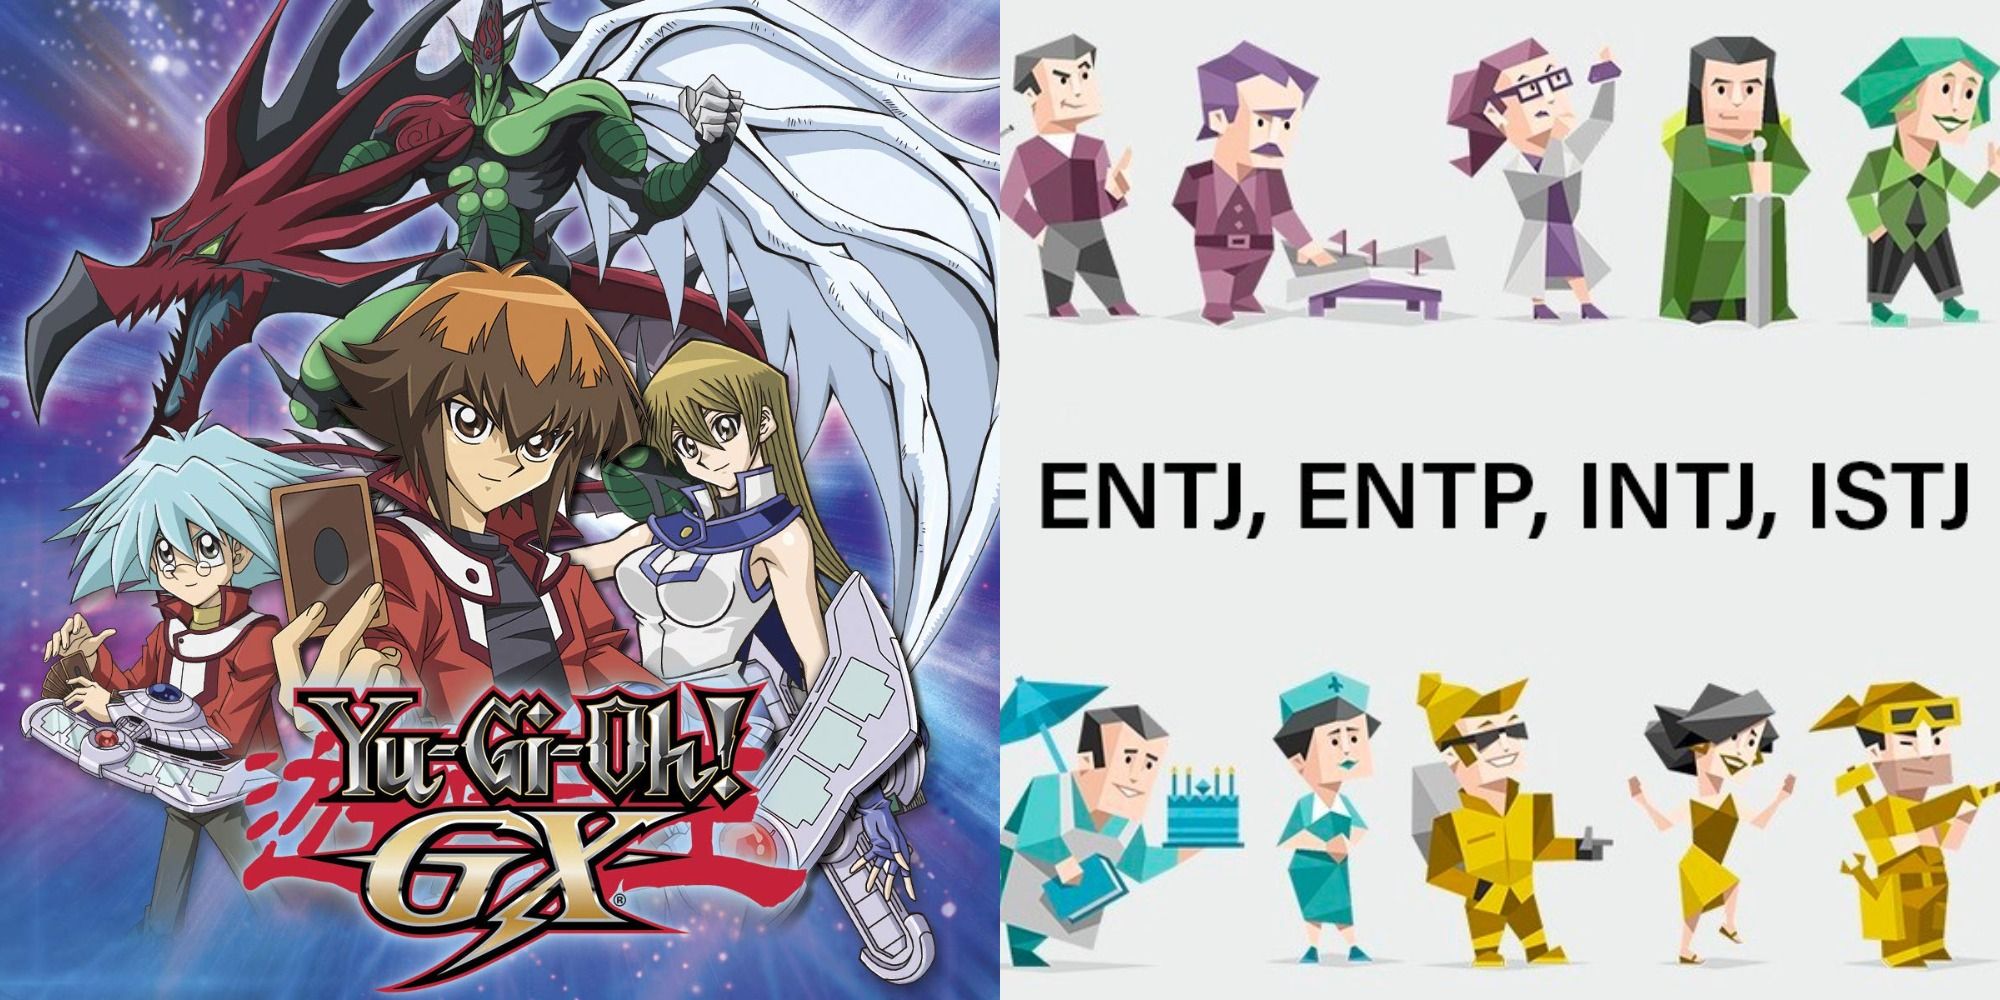 Which Sci-Fi Anime Should You Watch Based On Your MBTI®?